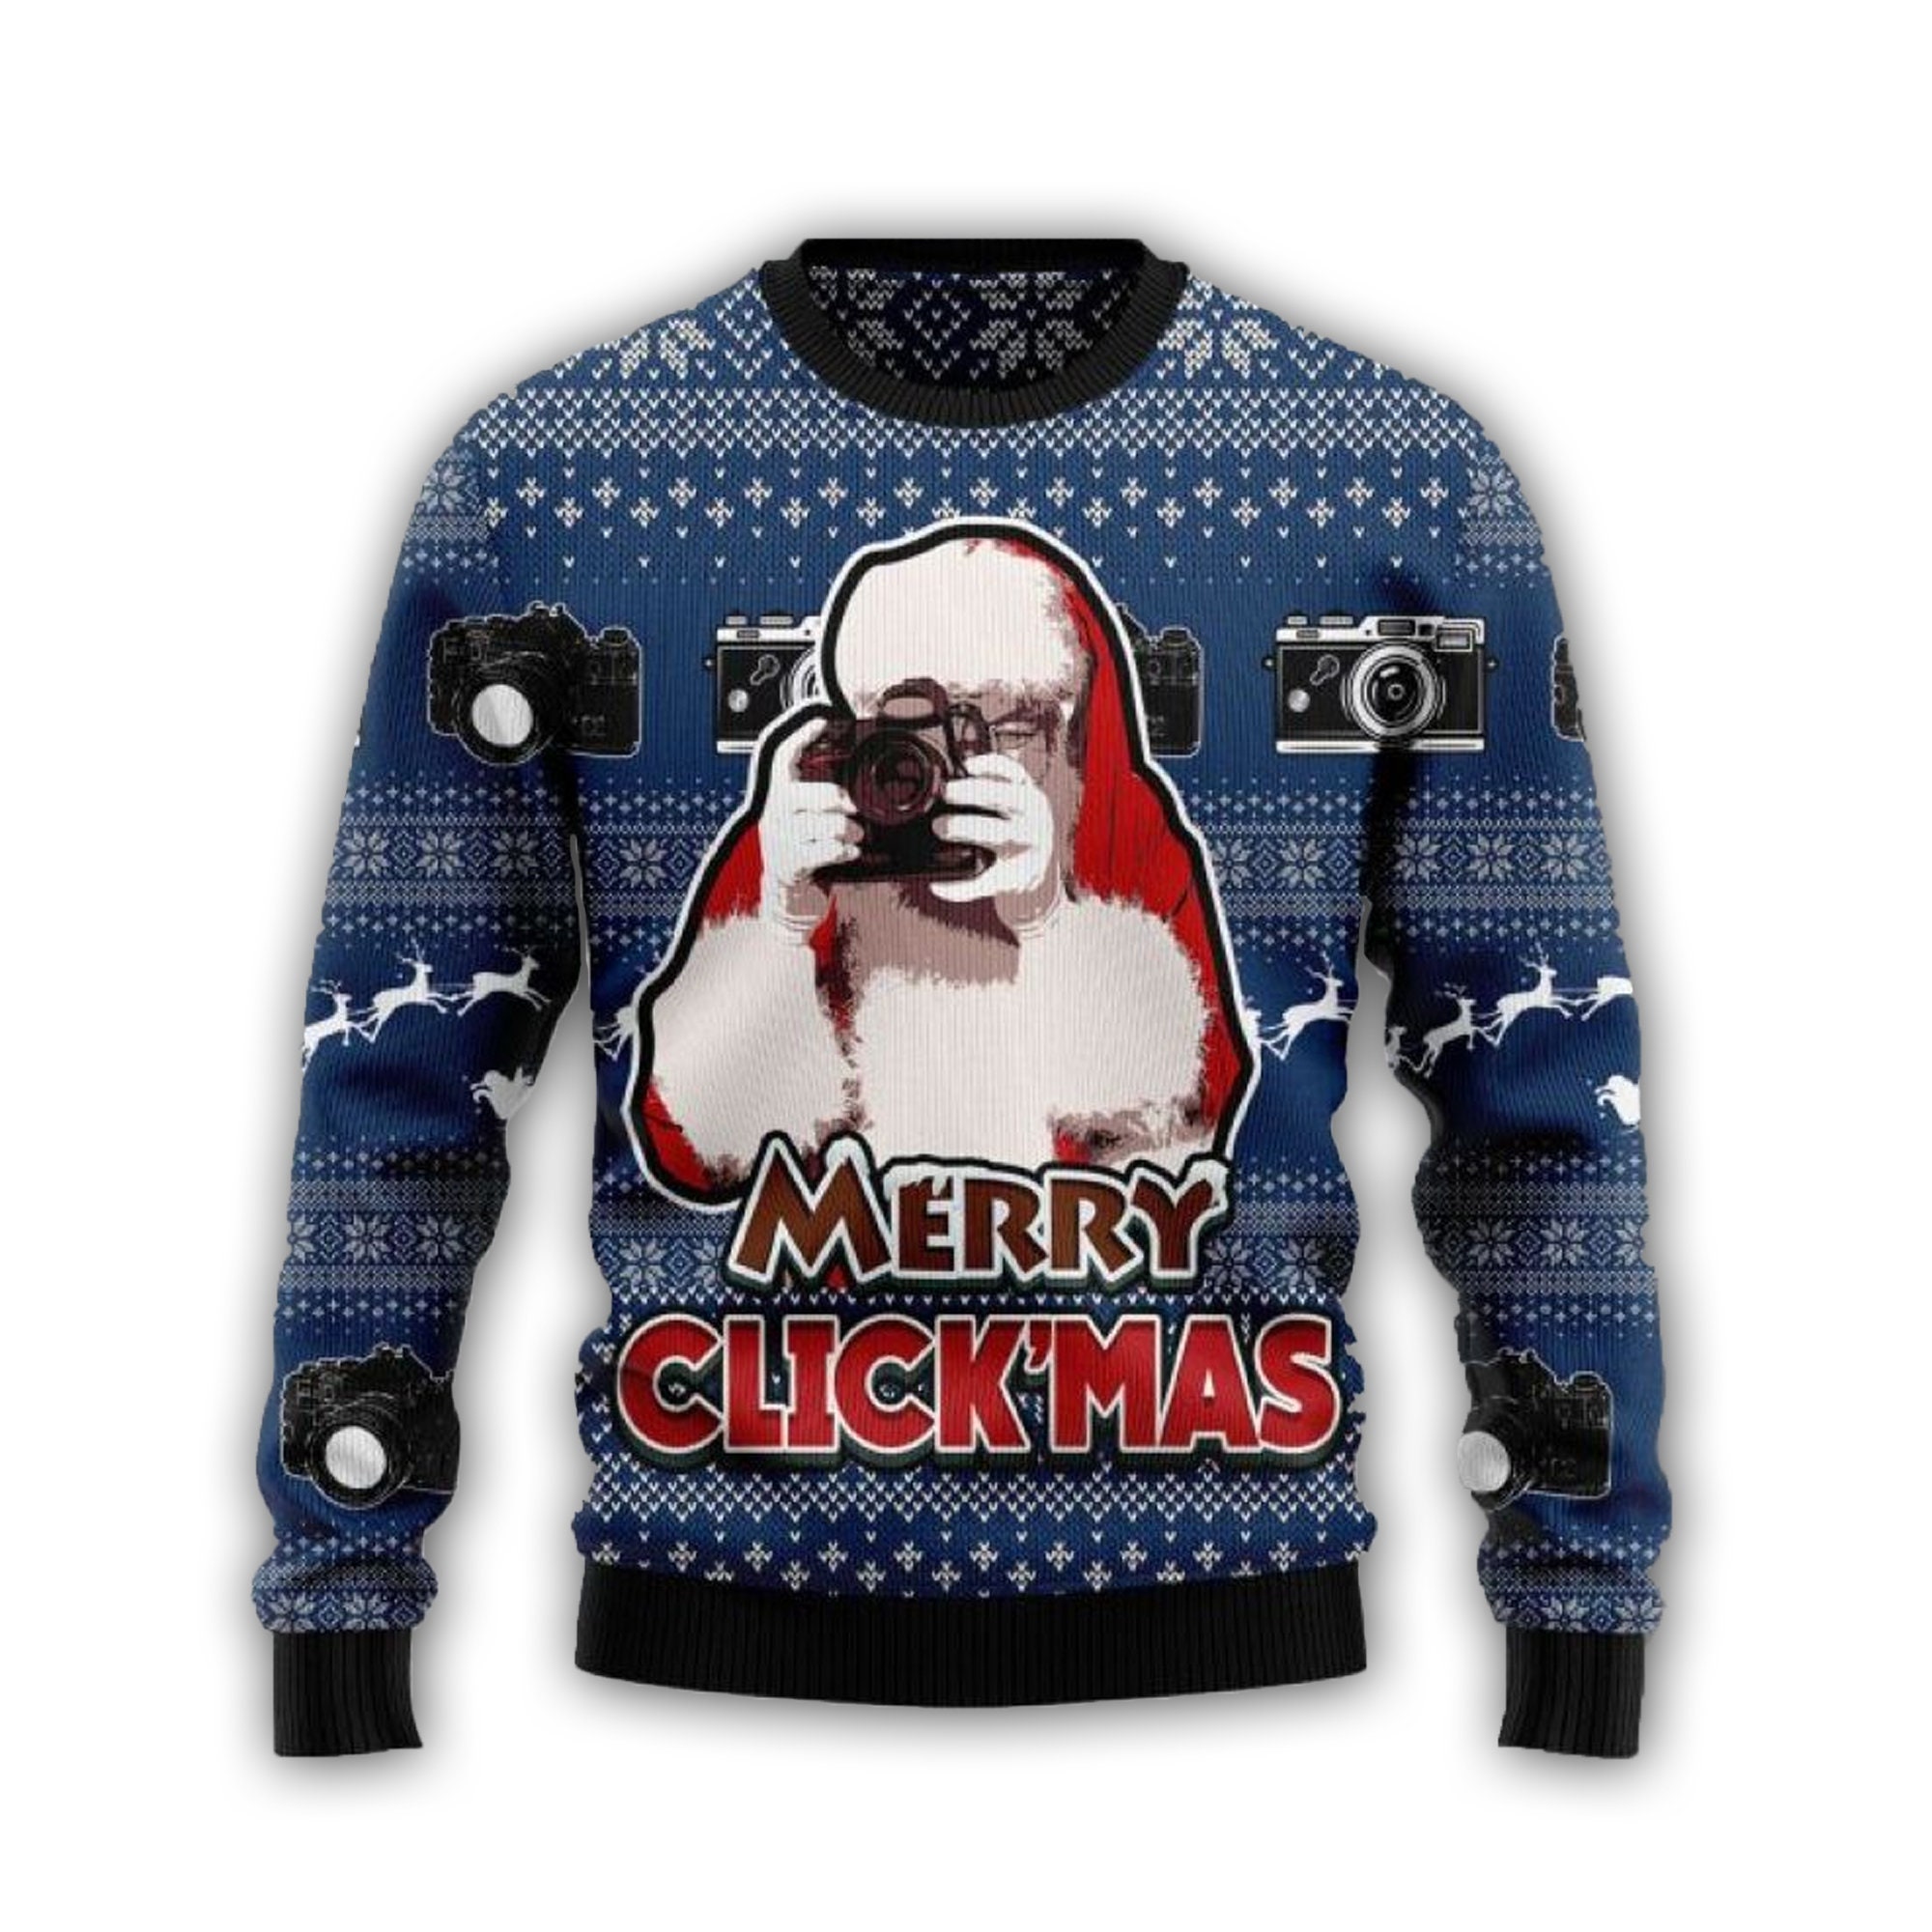 3D Merry Clickmas Funny Ugly Christmas Sweater, Santa Claus Funny Sweater, Christmas sweater, Christmas Gifts for her, holiday apparel